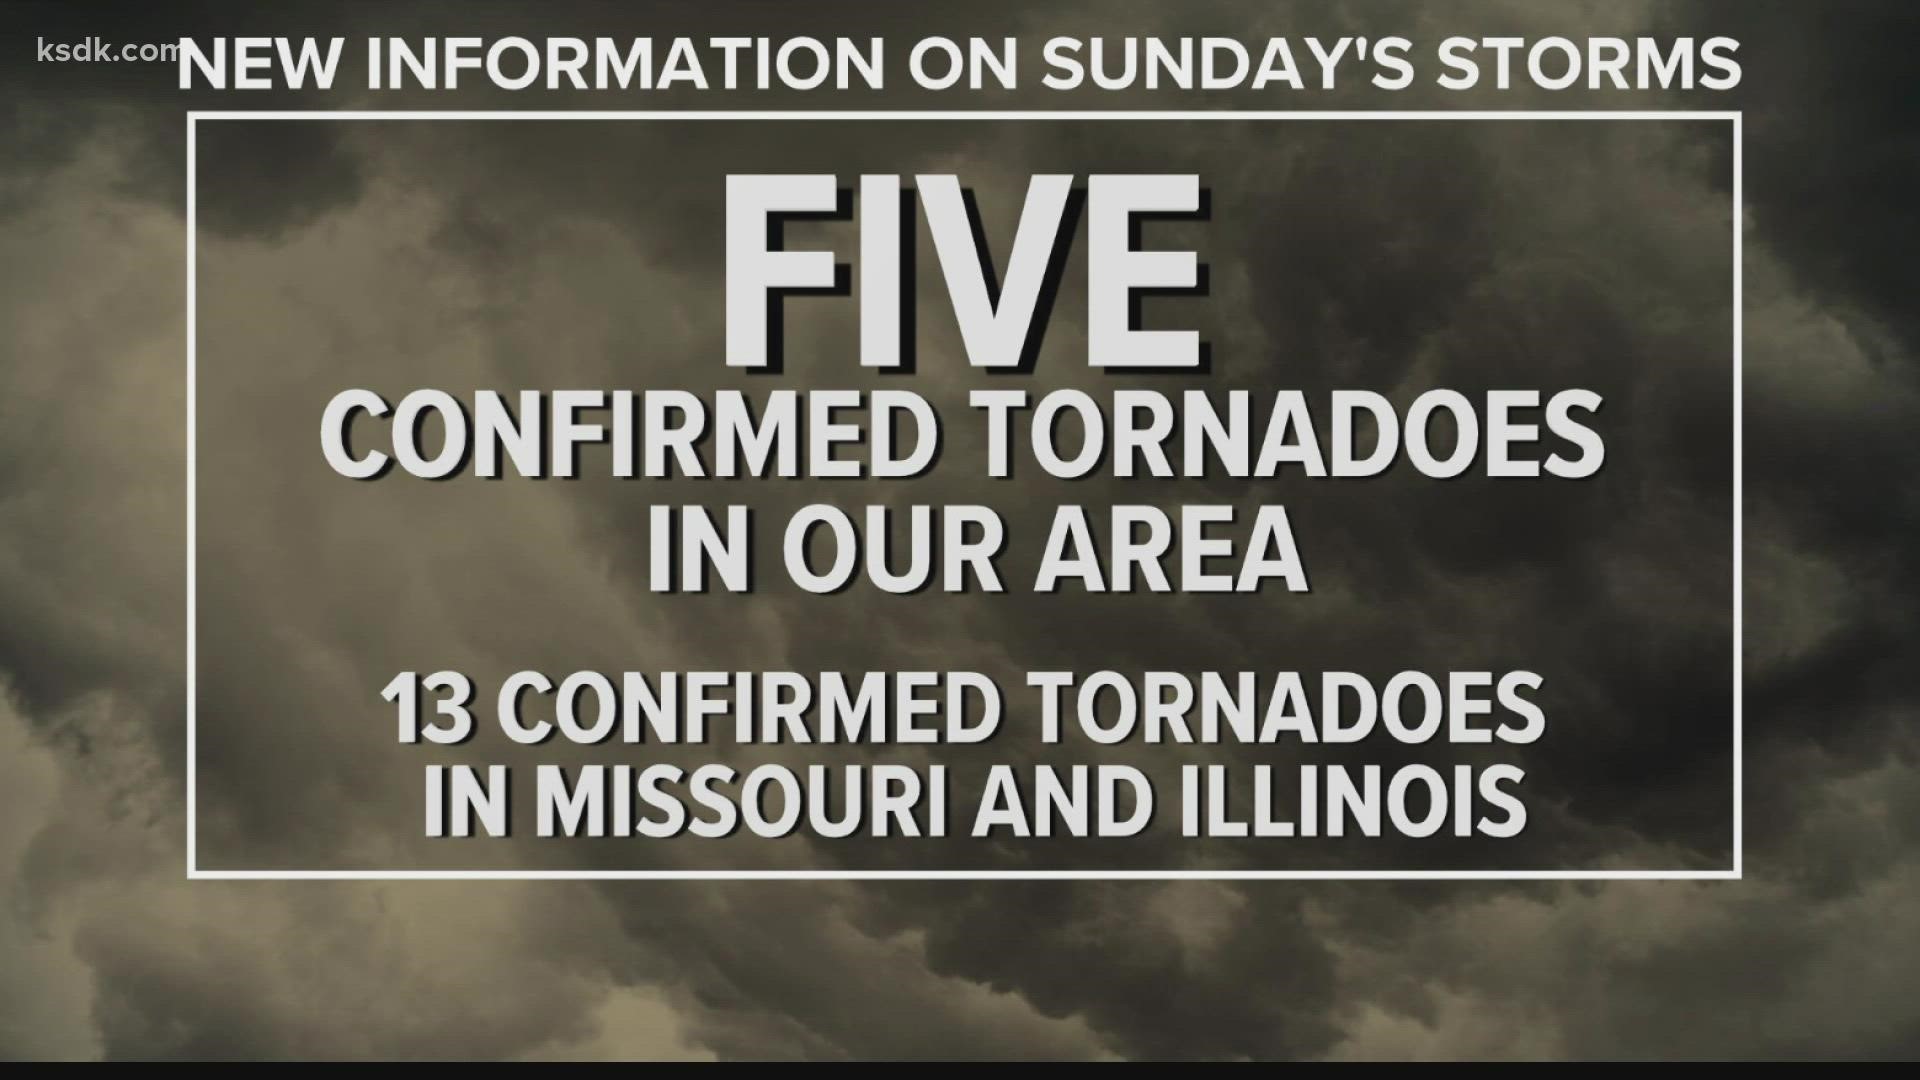 Two of the tornadoes were rated EF3 with winds of at least 136 mph.